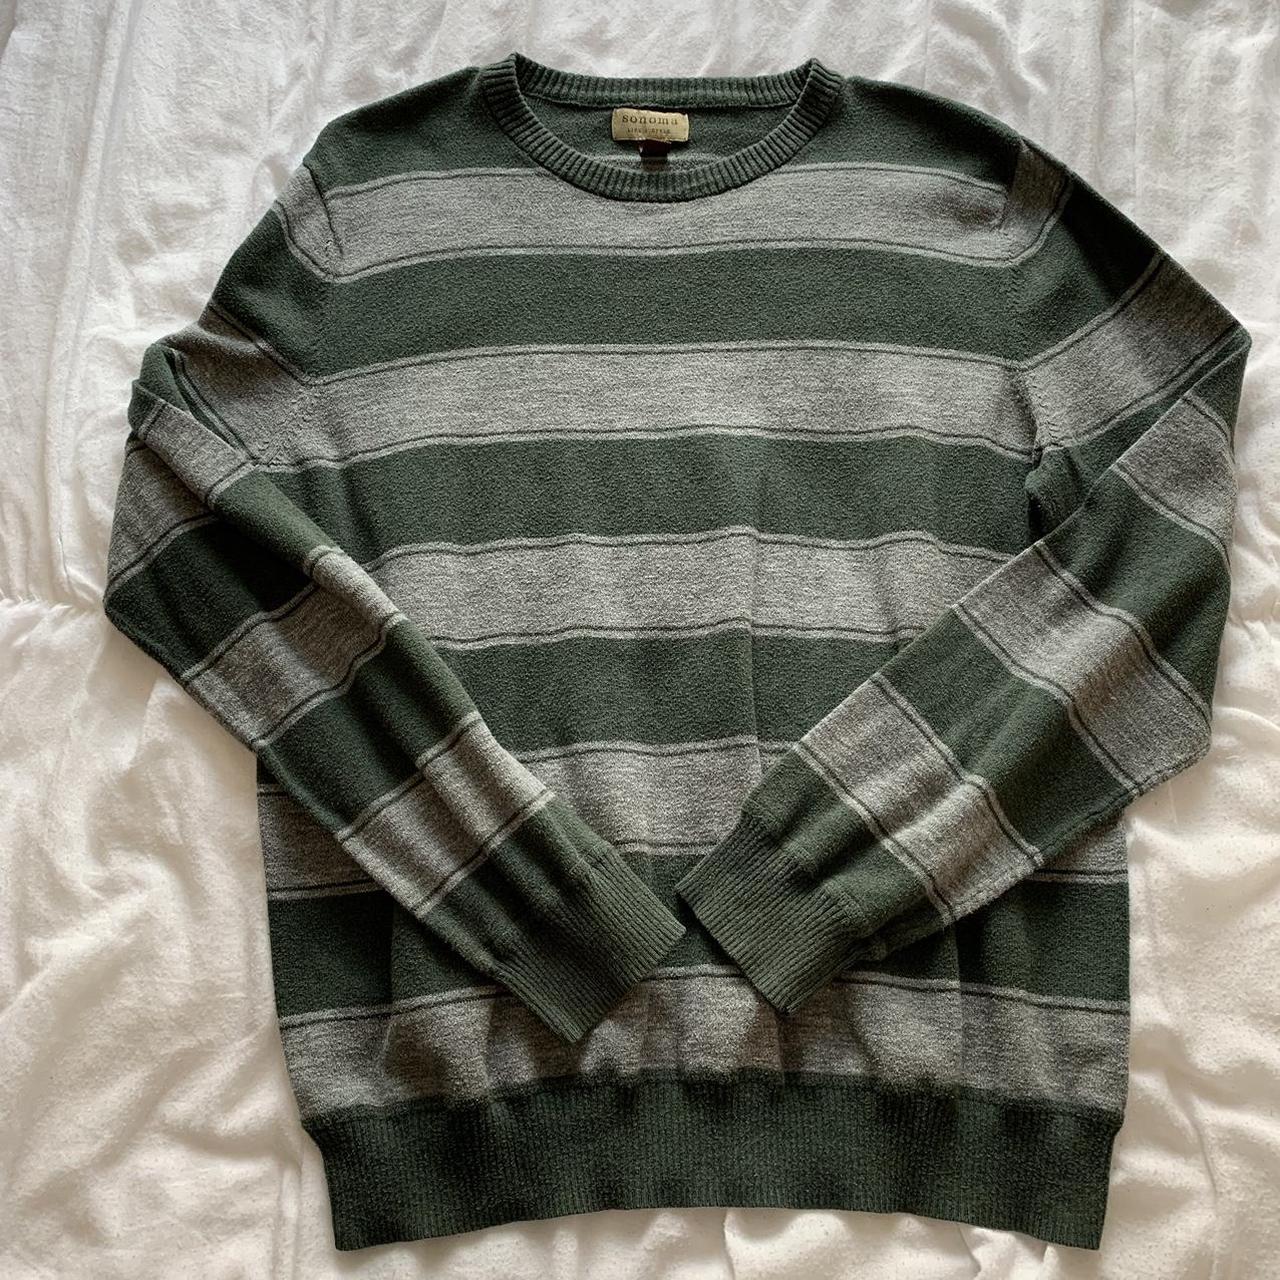 green and gray striped long sleeve (men’s sizing i... - Depop